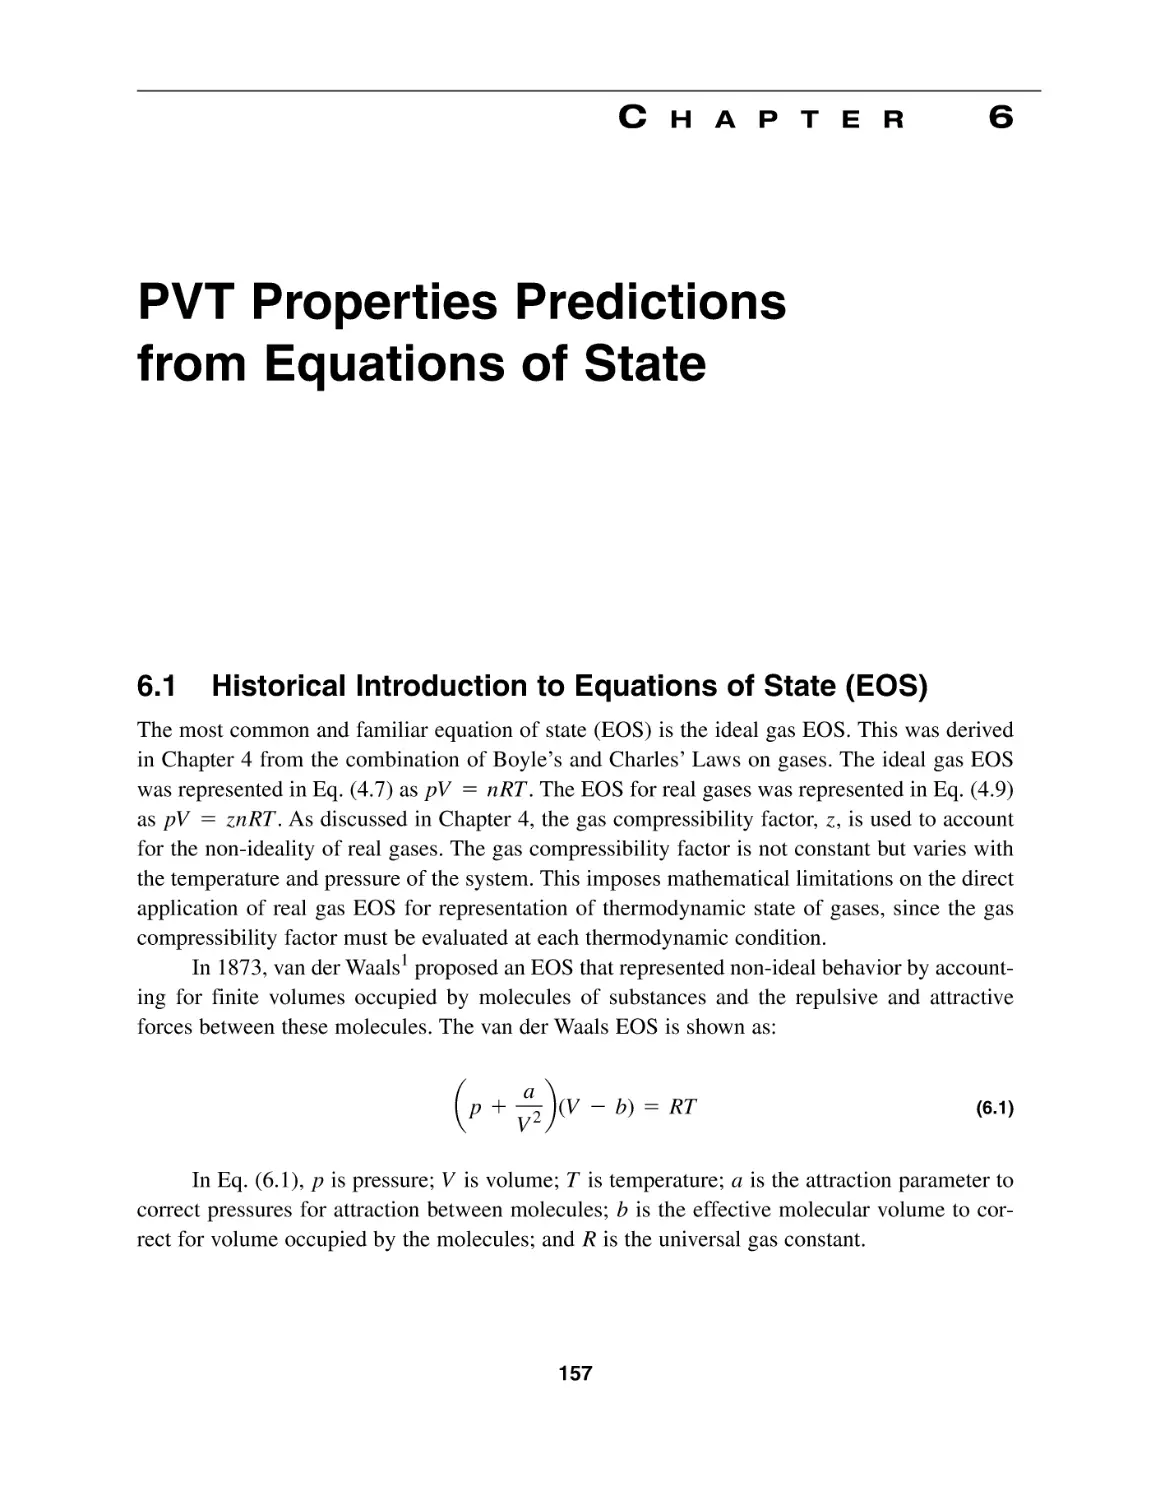 Chapter 6 PVT Properties Predictions from Equations of State
6.1 Historical Introduction to Equations of State (EOS)